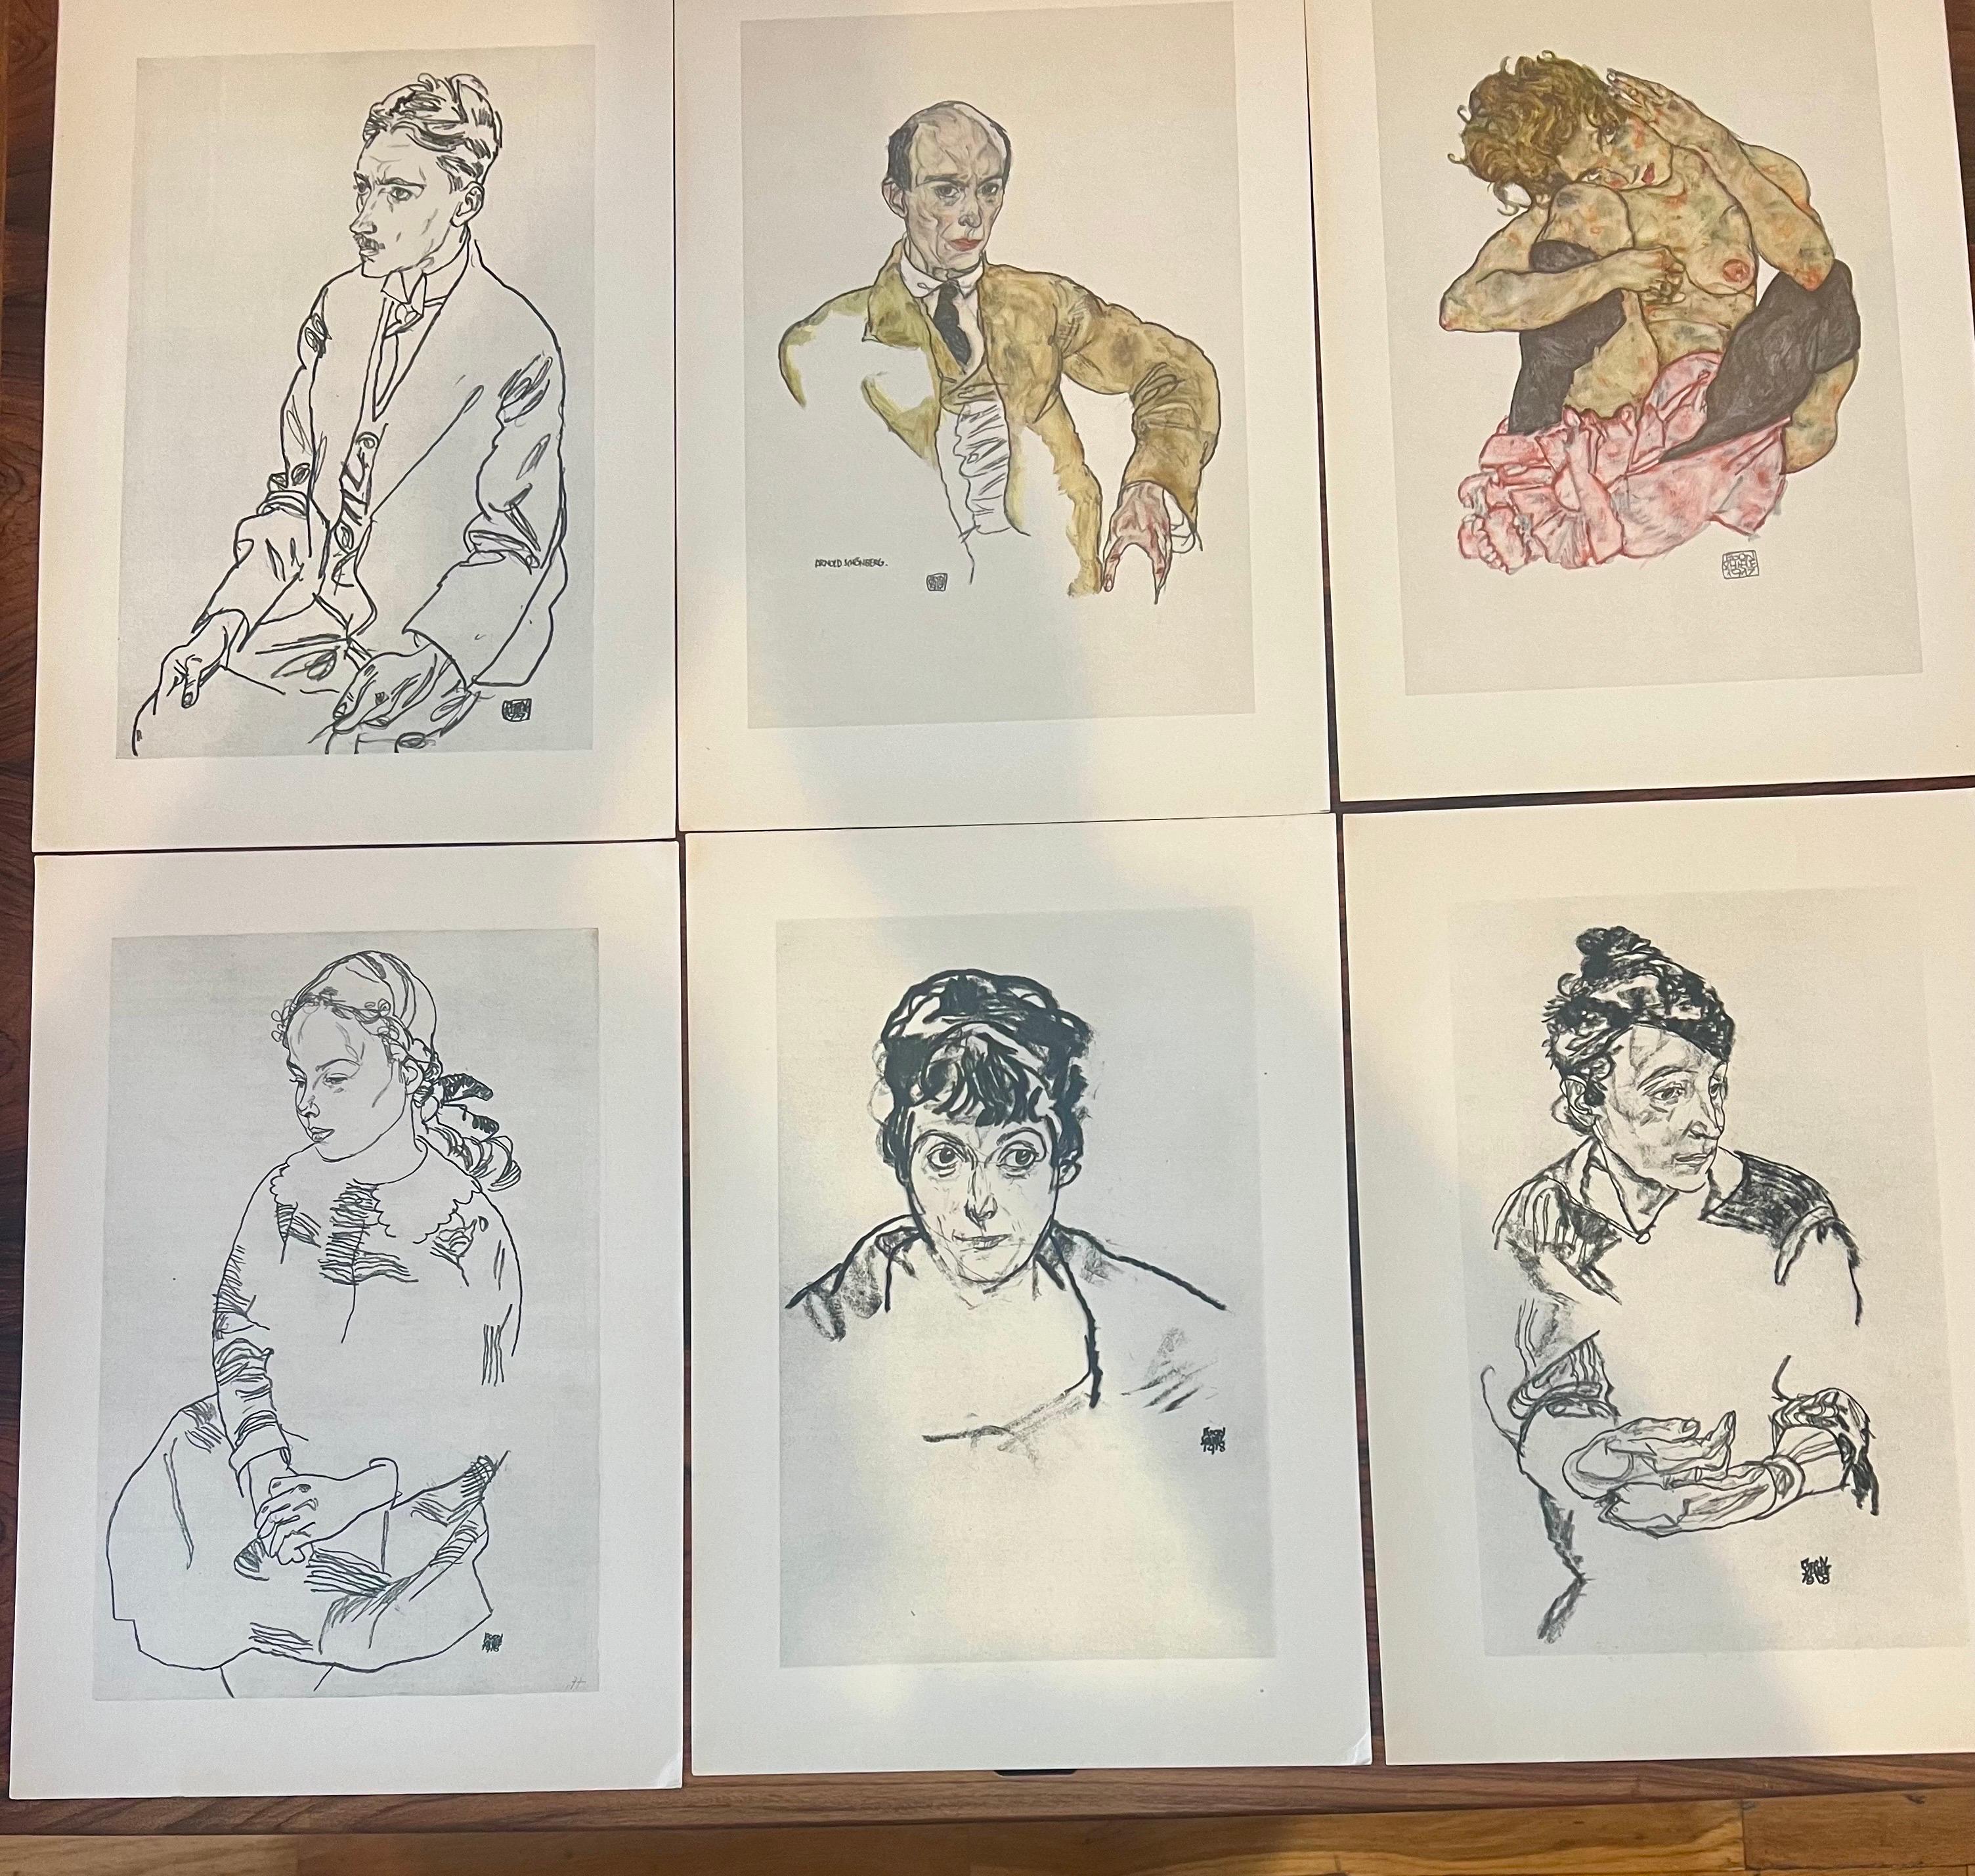 Paper First Edition Rare Portofolio Booklet by Egon Schiele 24 Unframed Prints For Sale